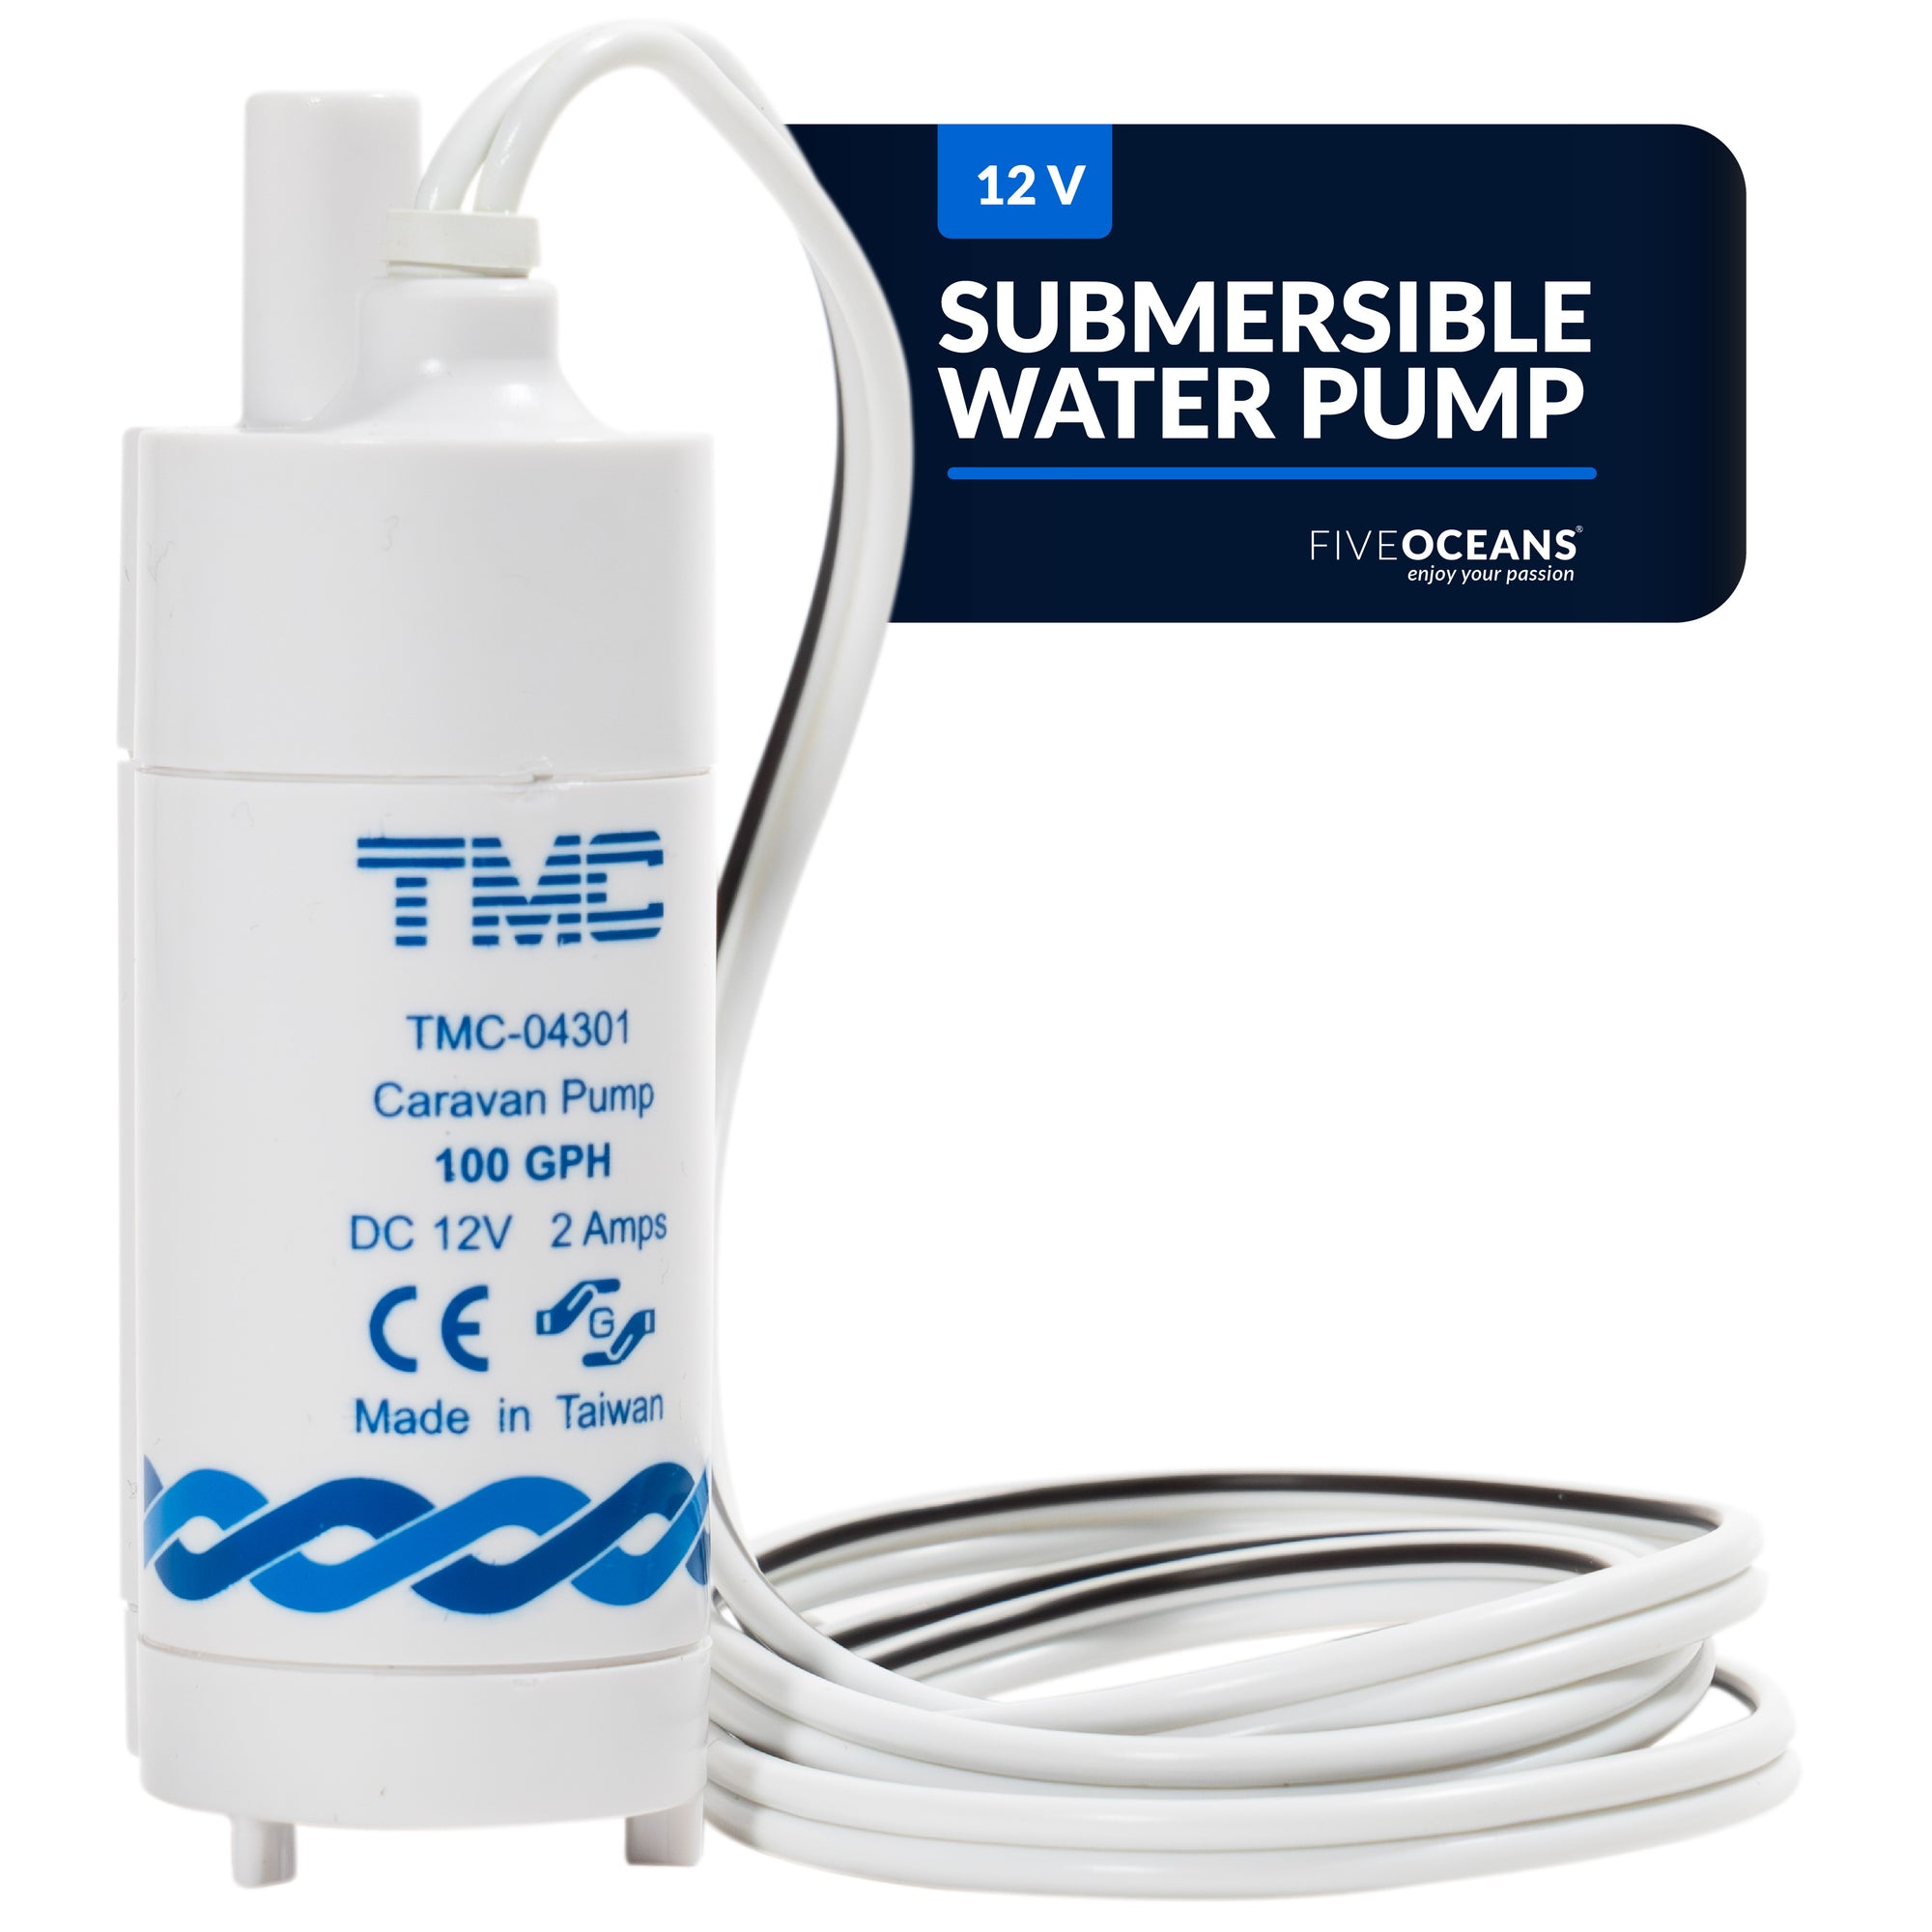 Submersible Electric Galley Water Pump, 12V - FO-3463